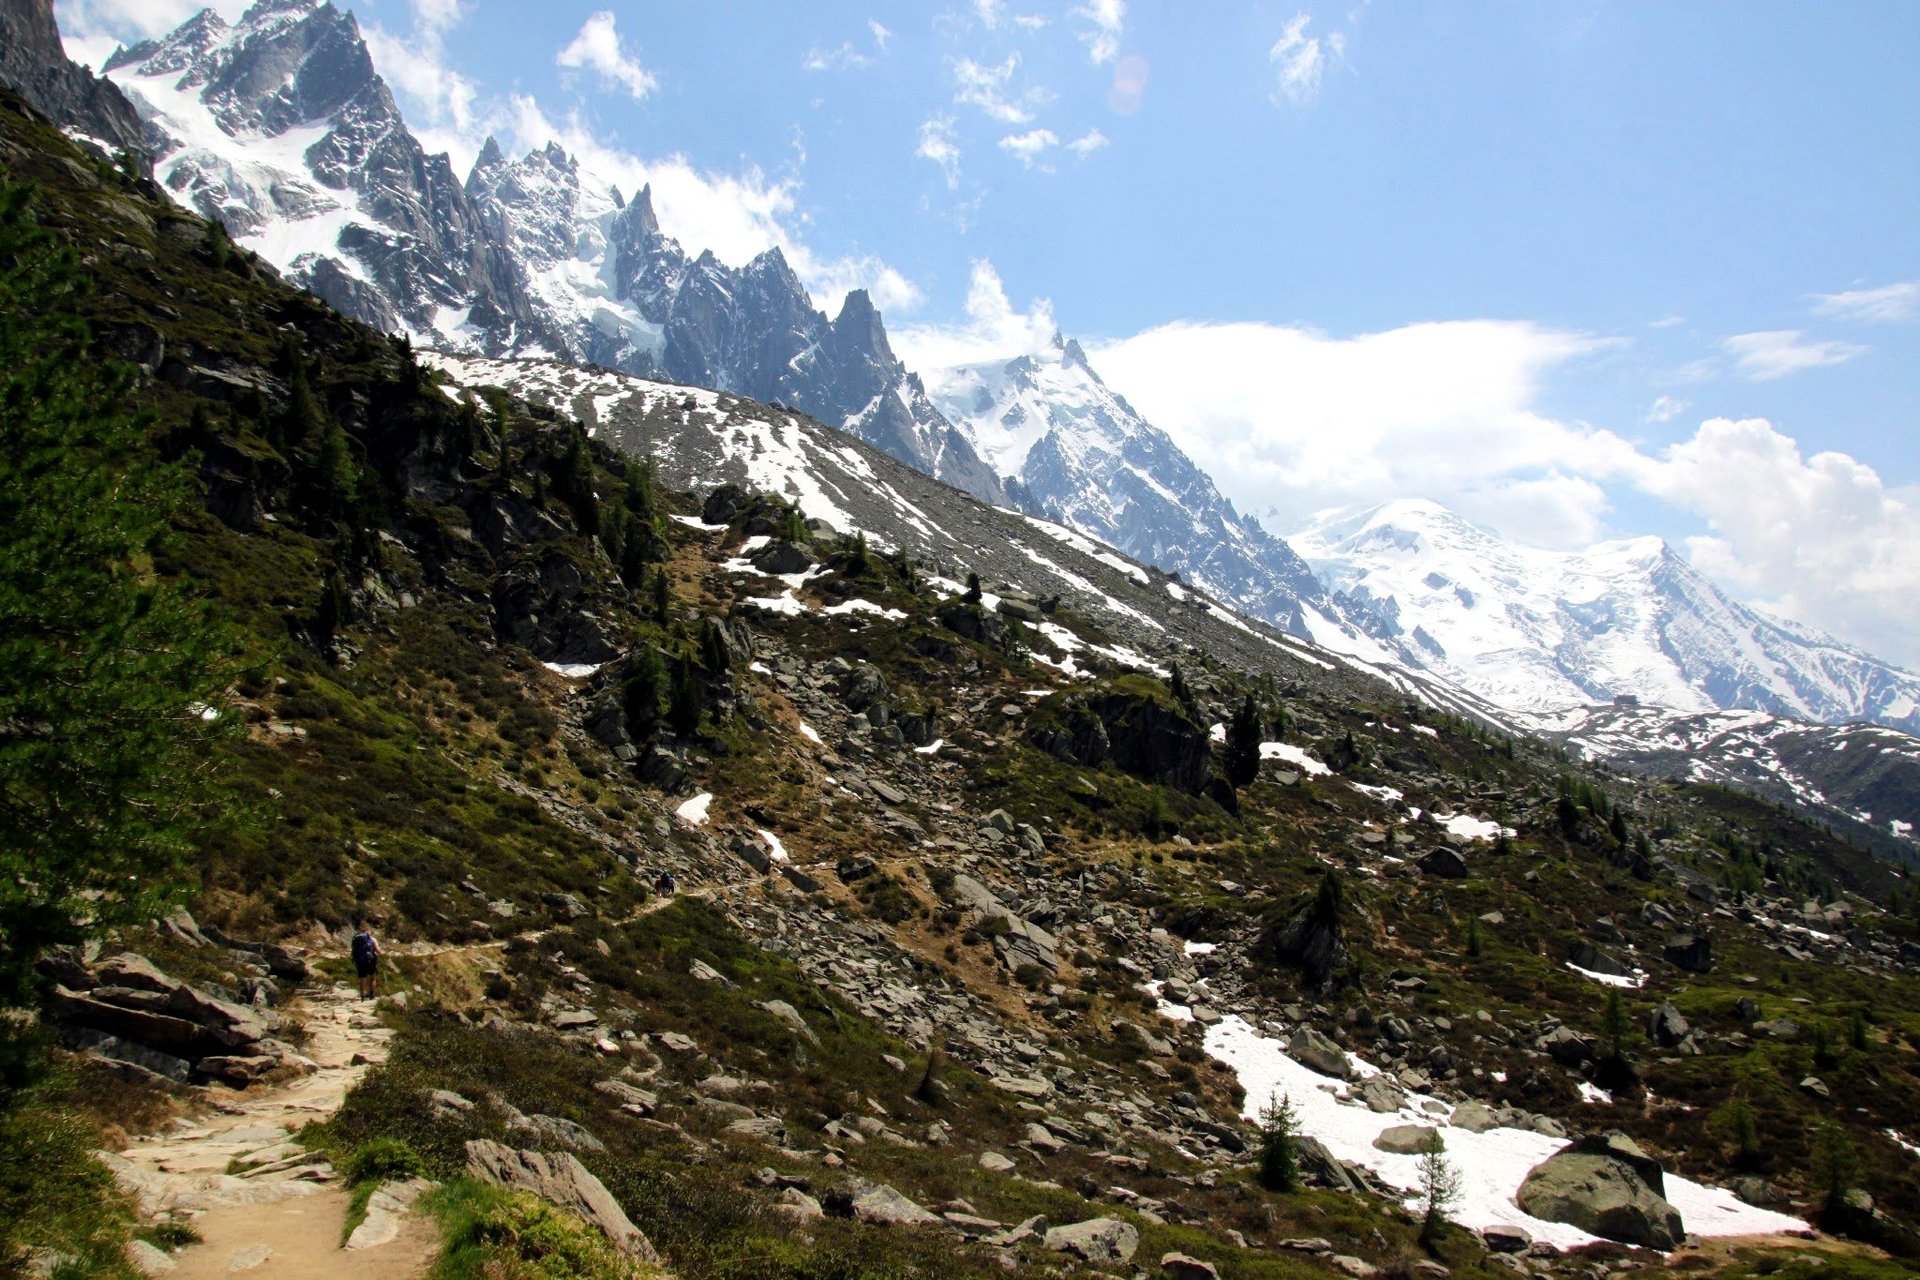 A hike in the Mont Blanc massif